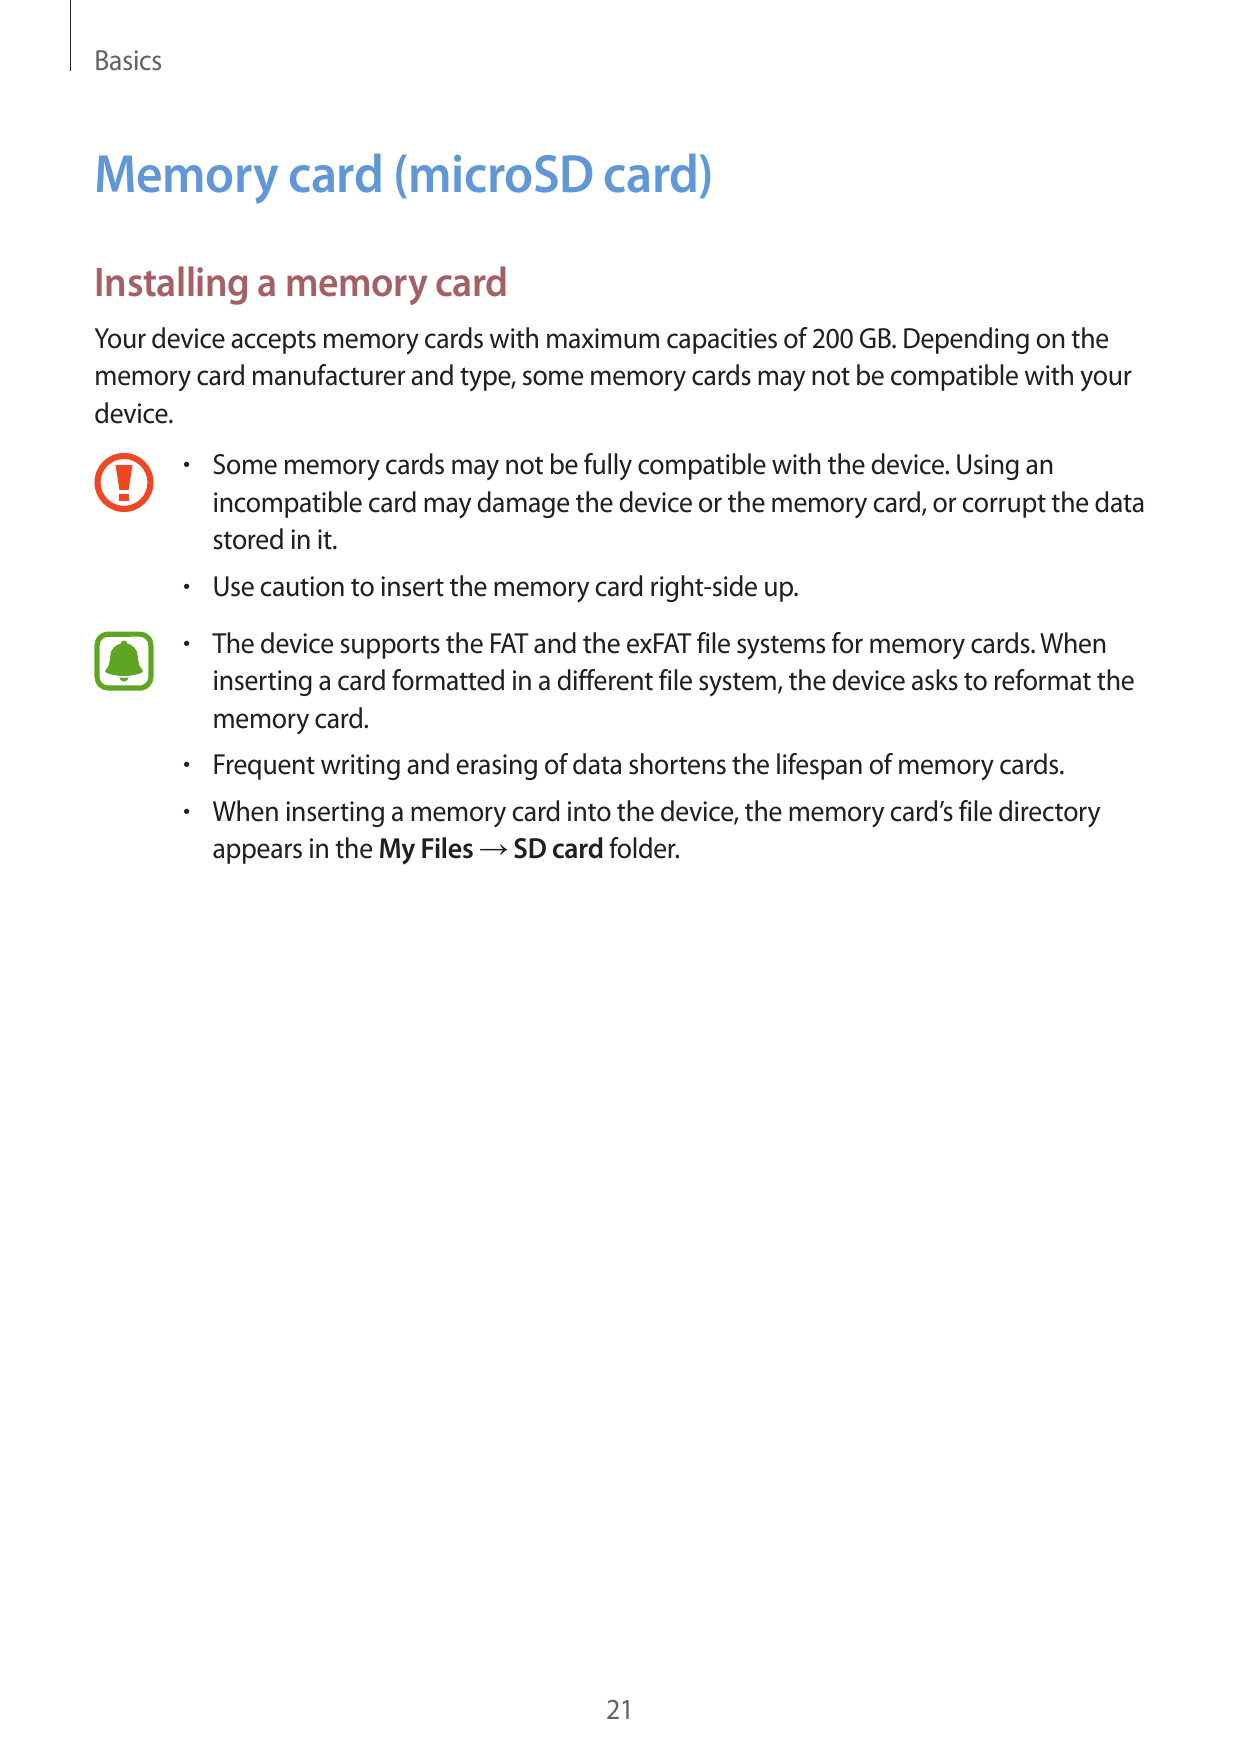 BasicsMemory card (microSD card)Installing a memory cardYour device accepts memory cards with maximum capacities of 200 GB. Depe